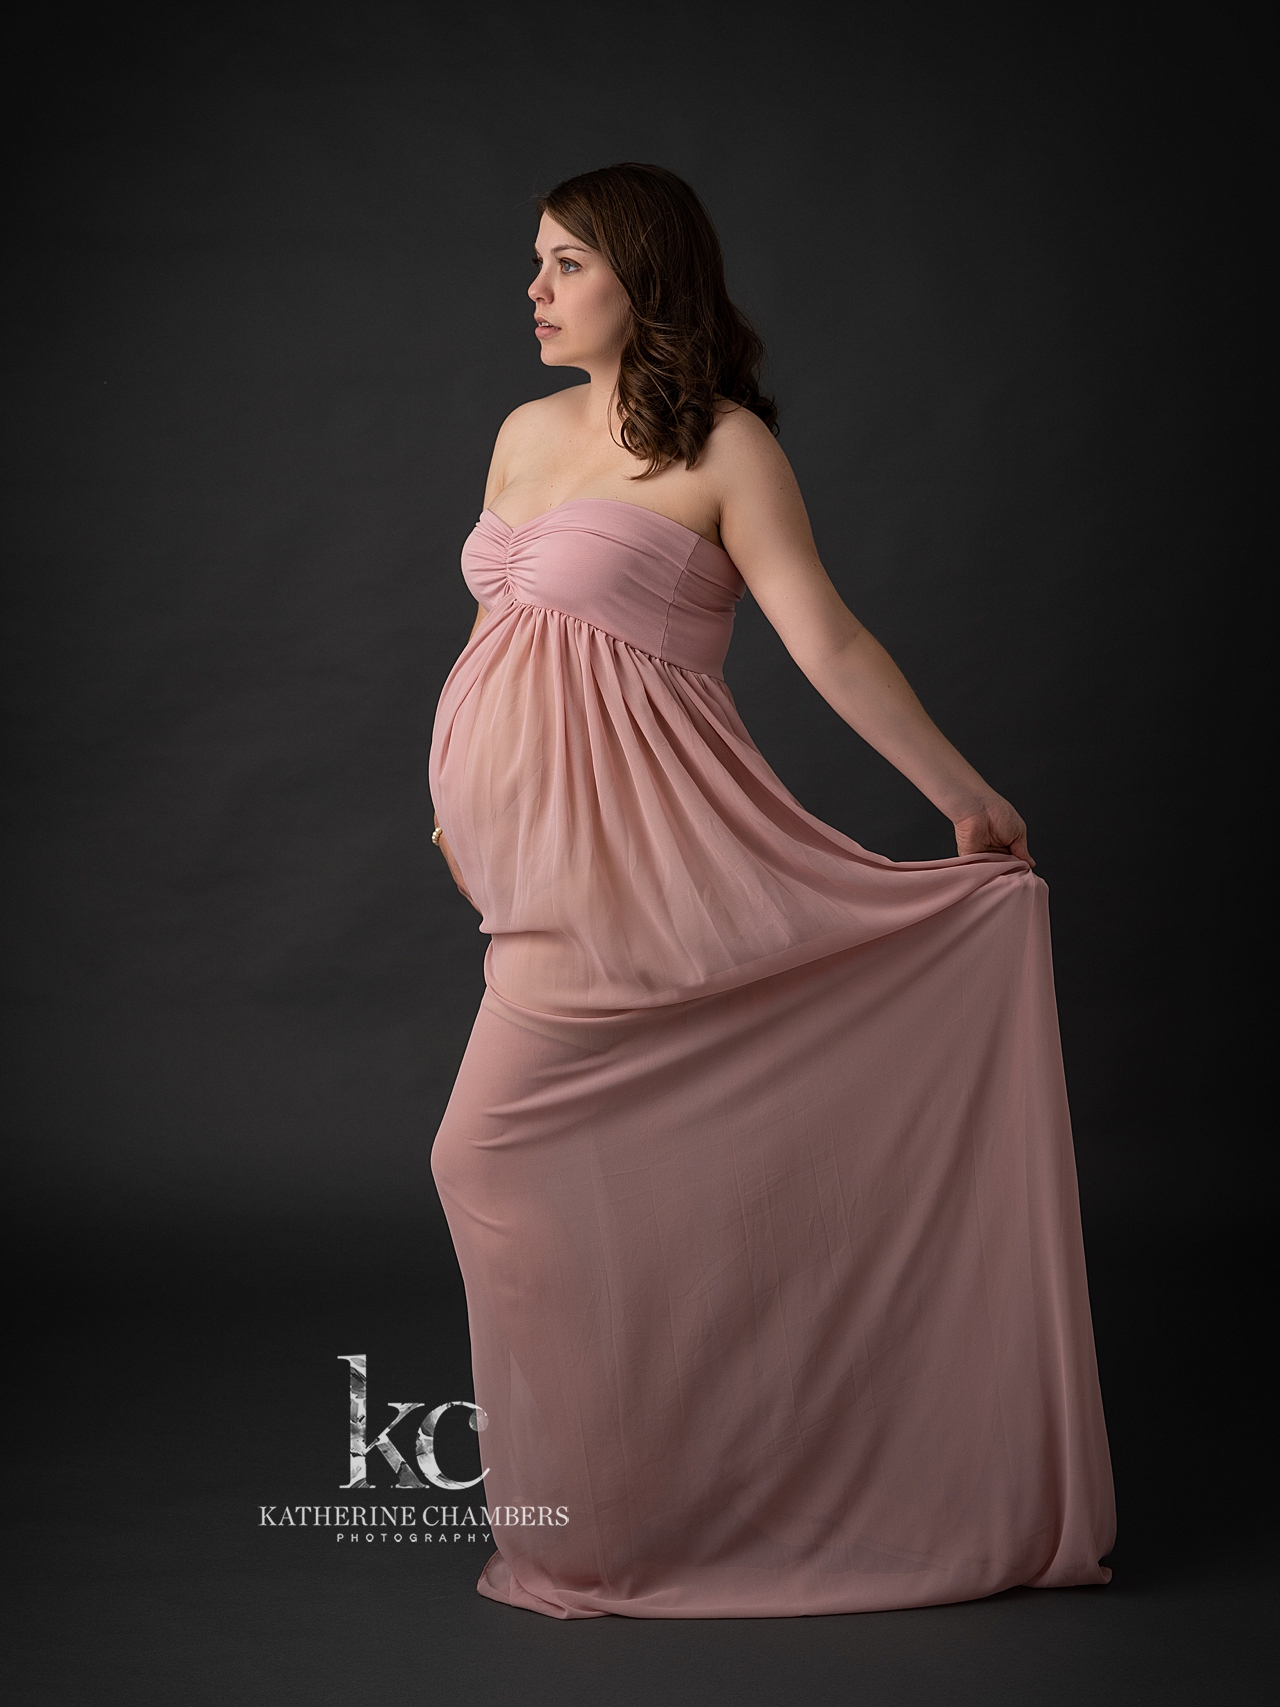 Newborn/Maternity Session Package